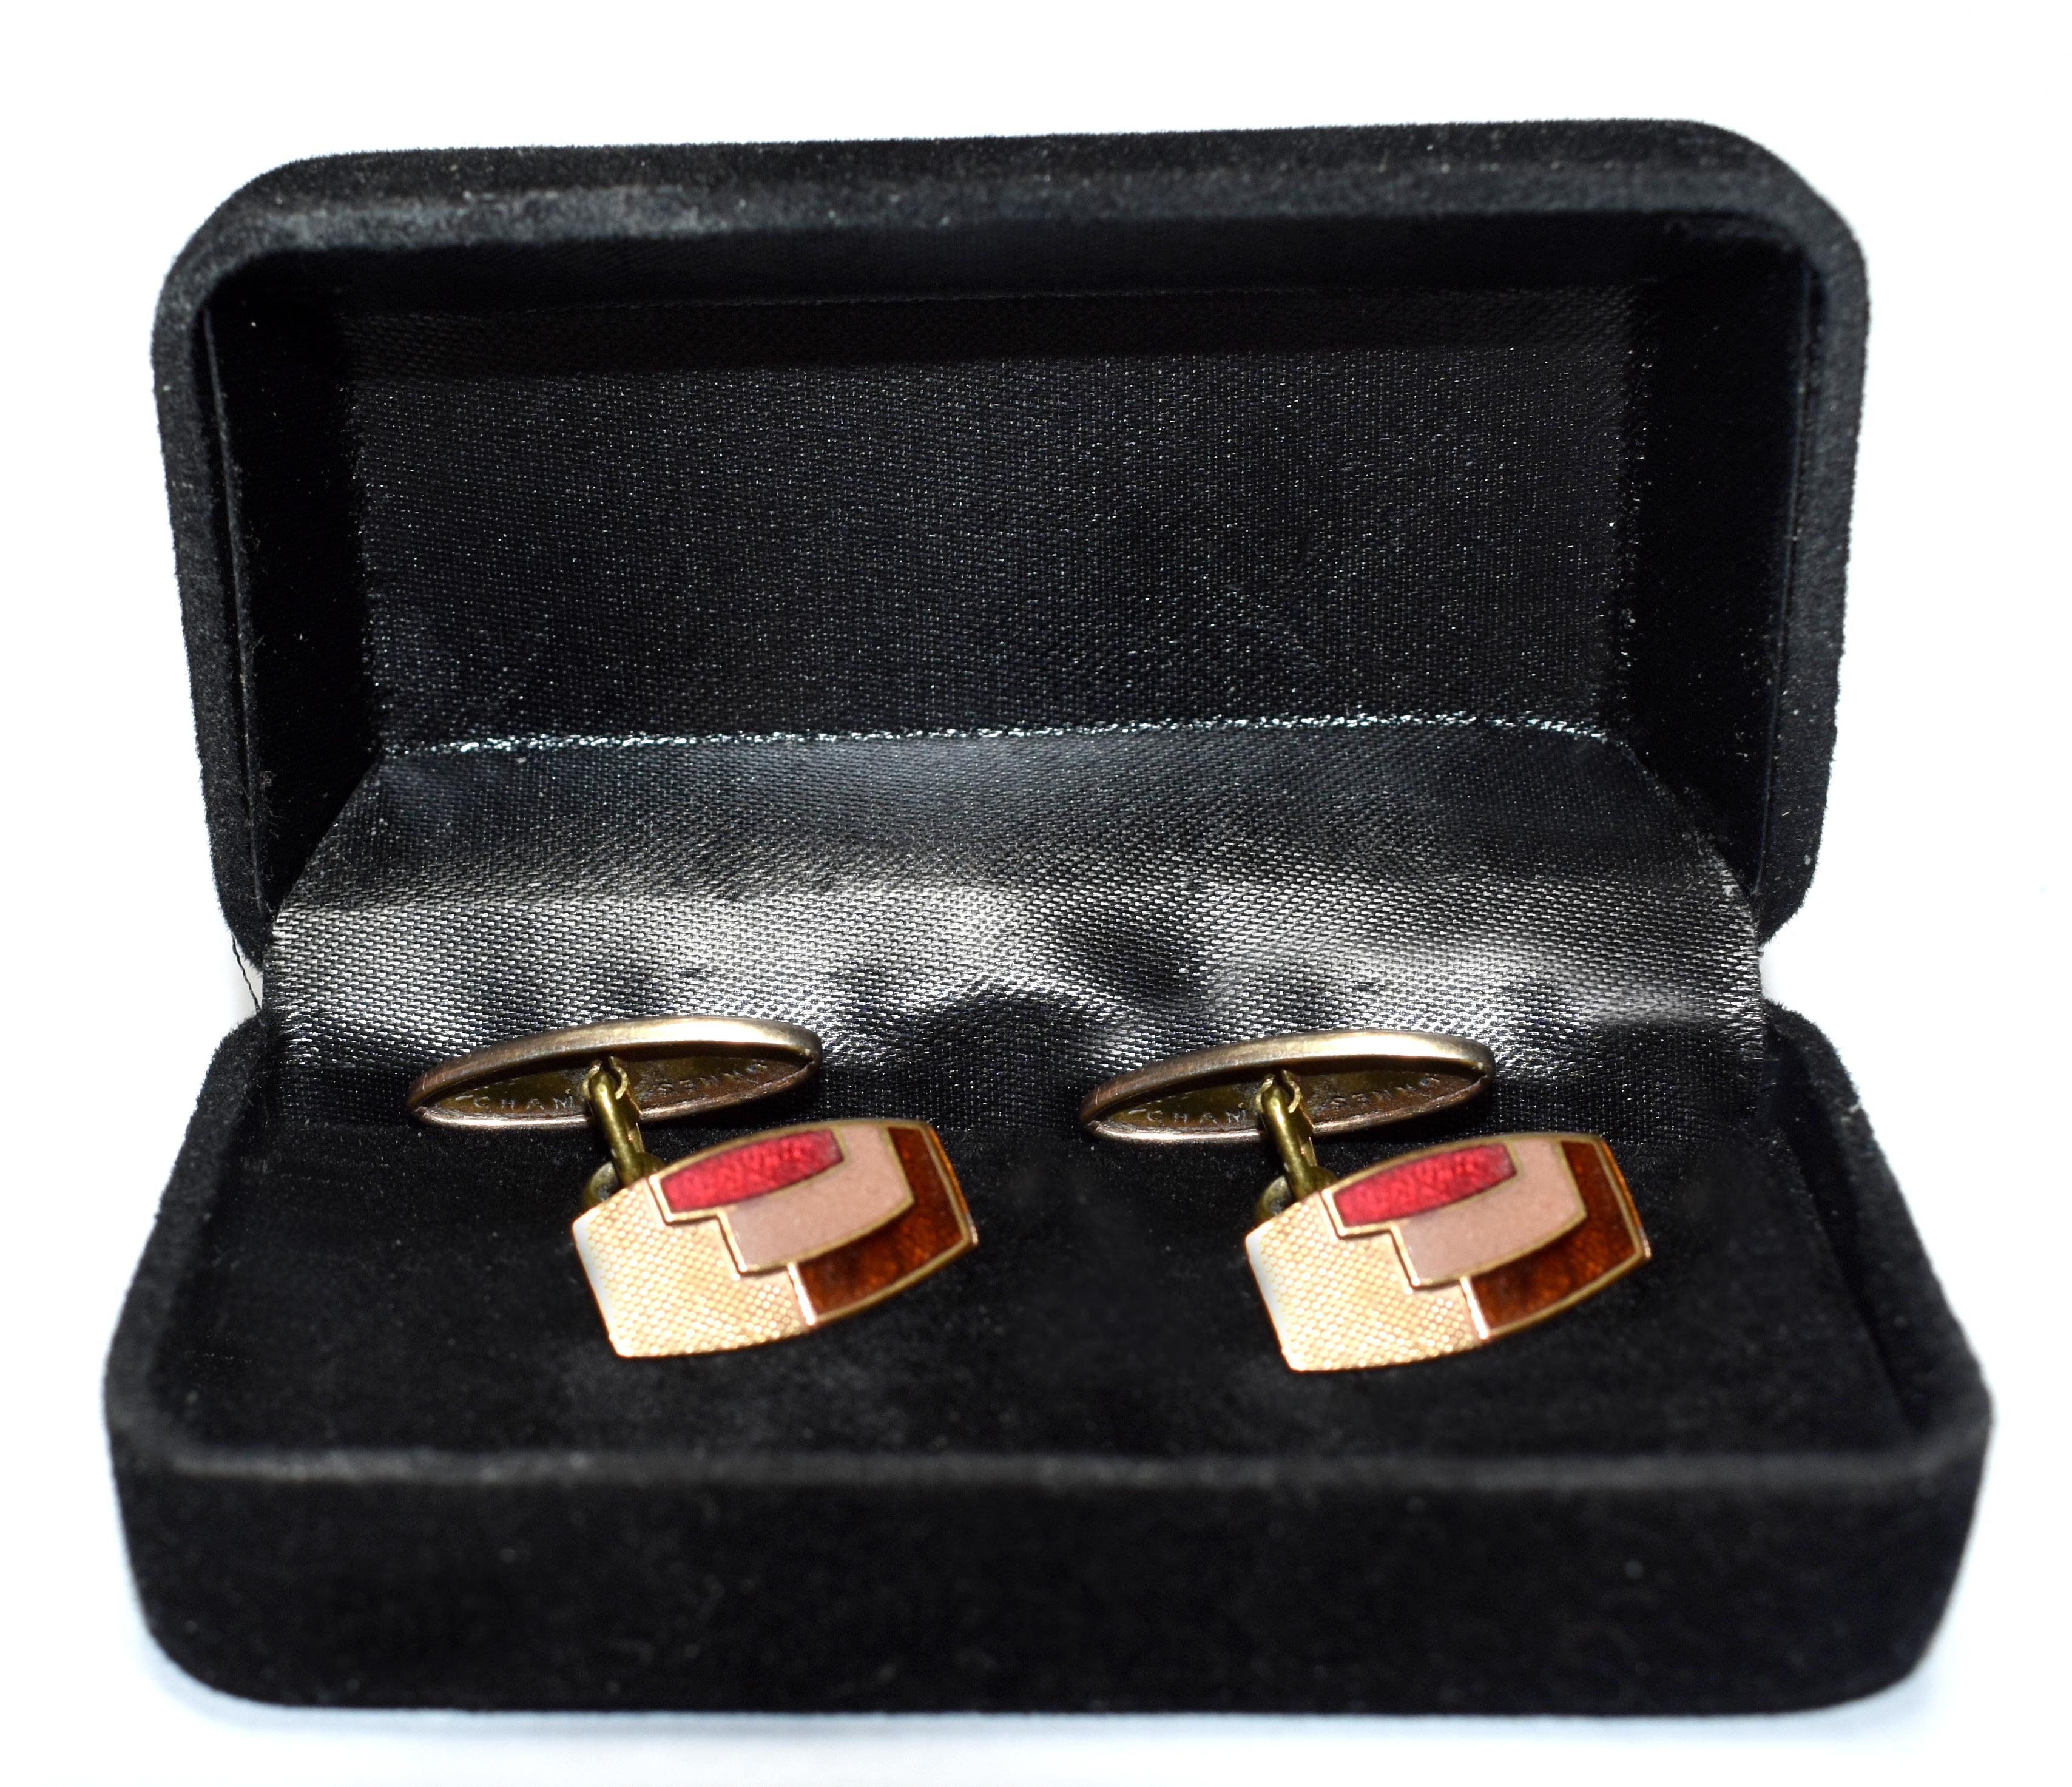 For the gentlemen out there who lean towards something a little different, less generic and oozing style consider these original matching pair of Art Deco gents cufflinks. Gold toned metal with beige, red and brown panels of enamel decoration